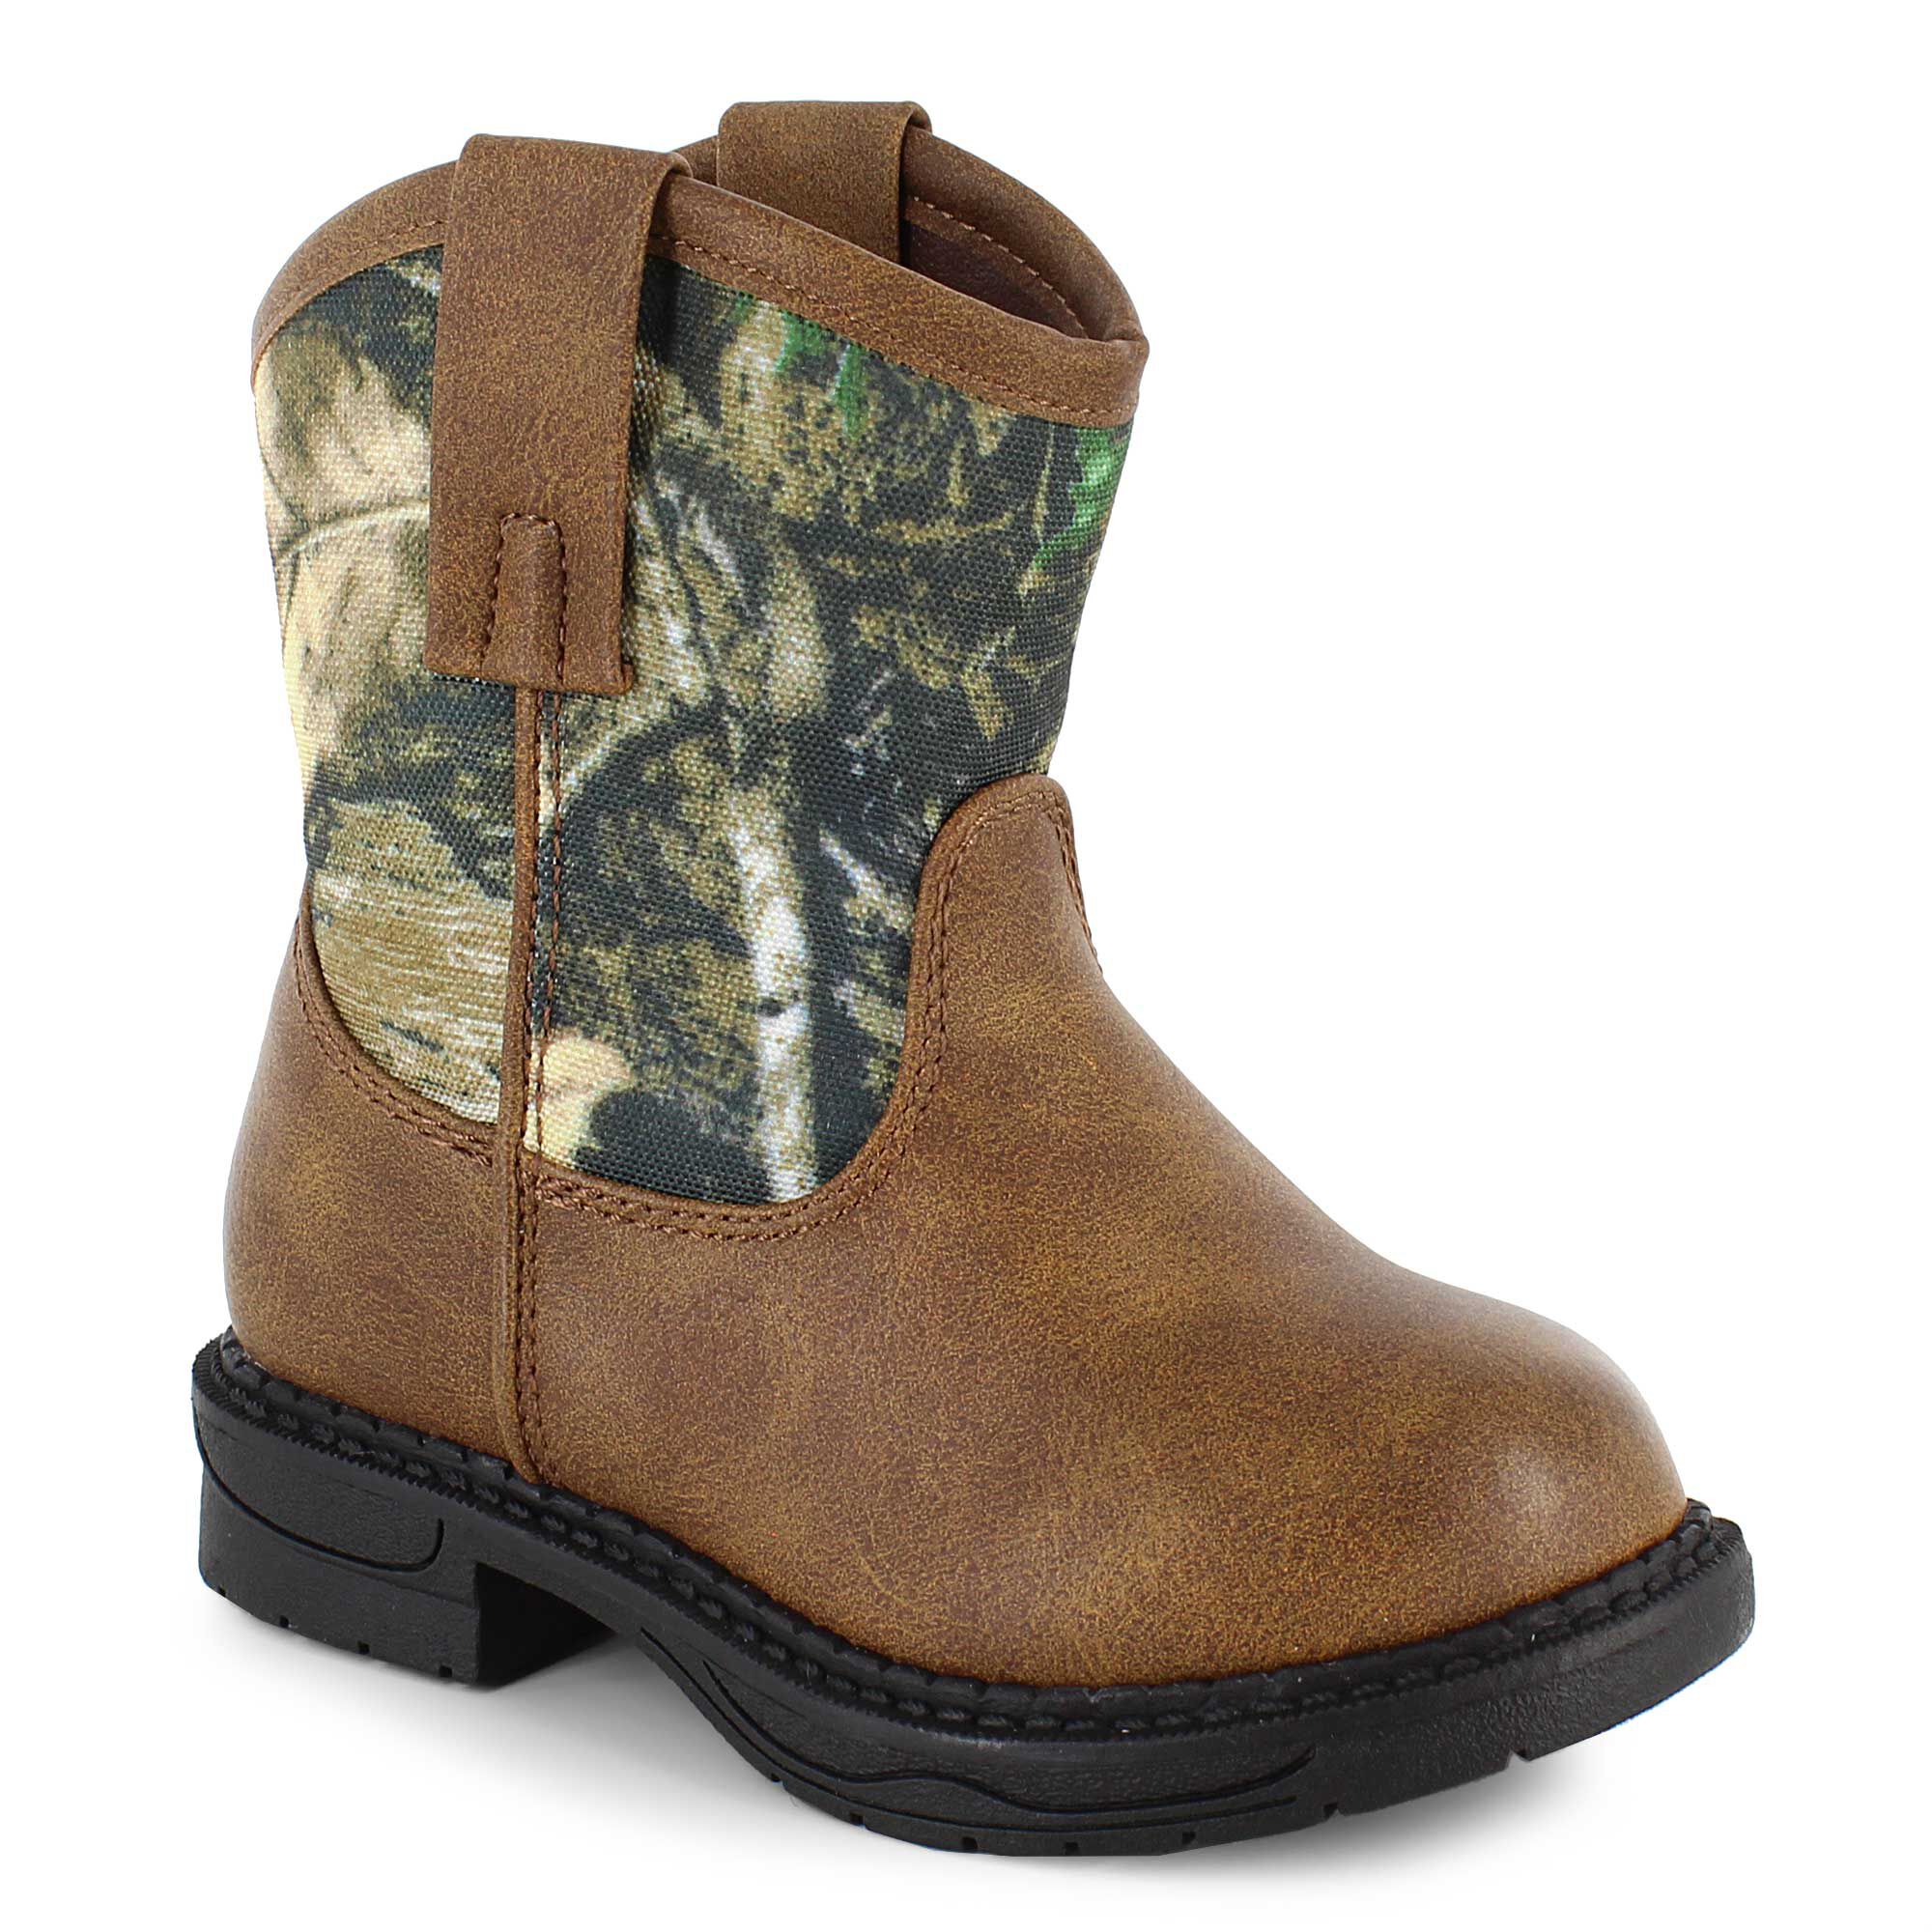 outbound trading company boots